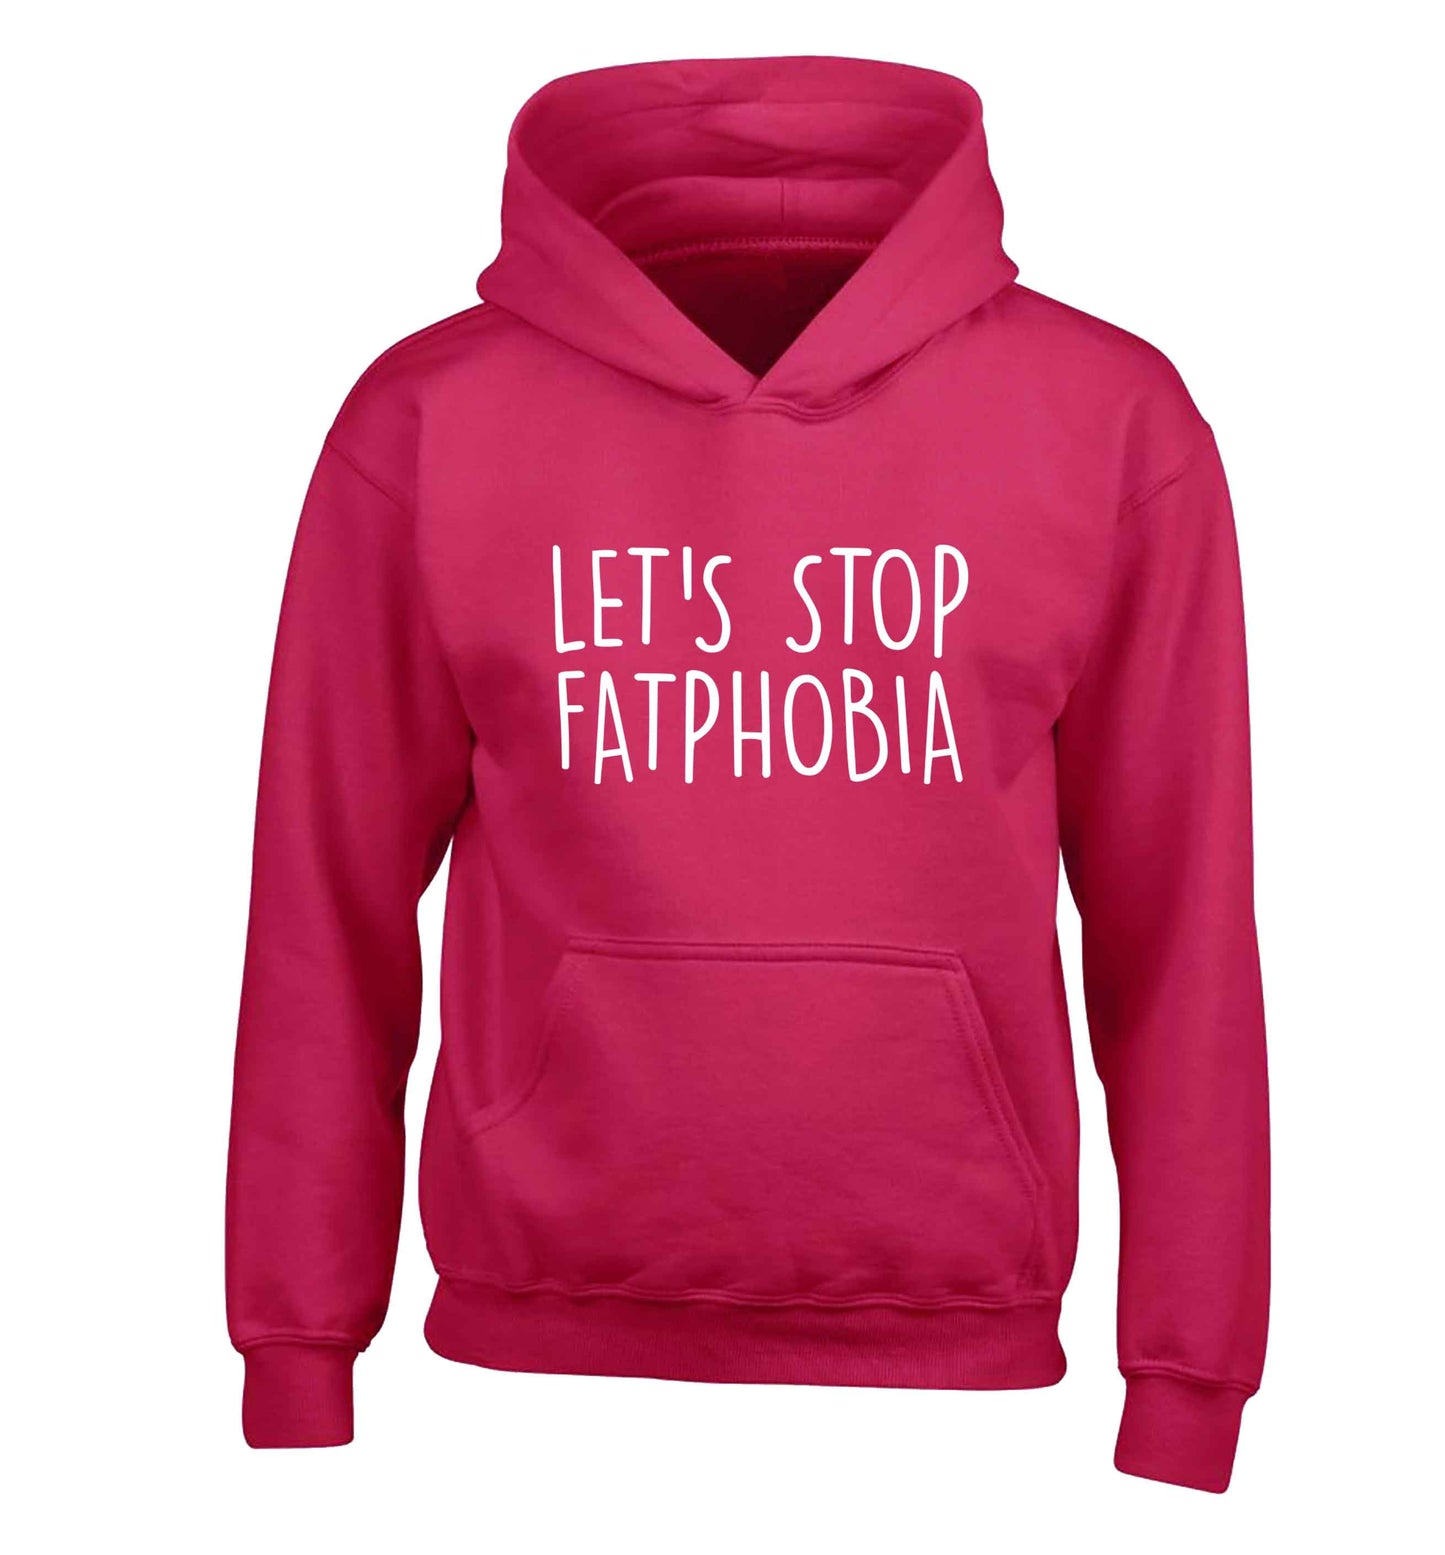 Let's stop fatphobia children's pink hoodie 12-13 Years